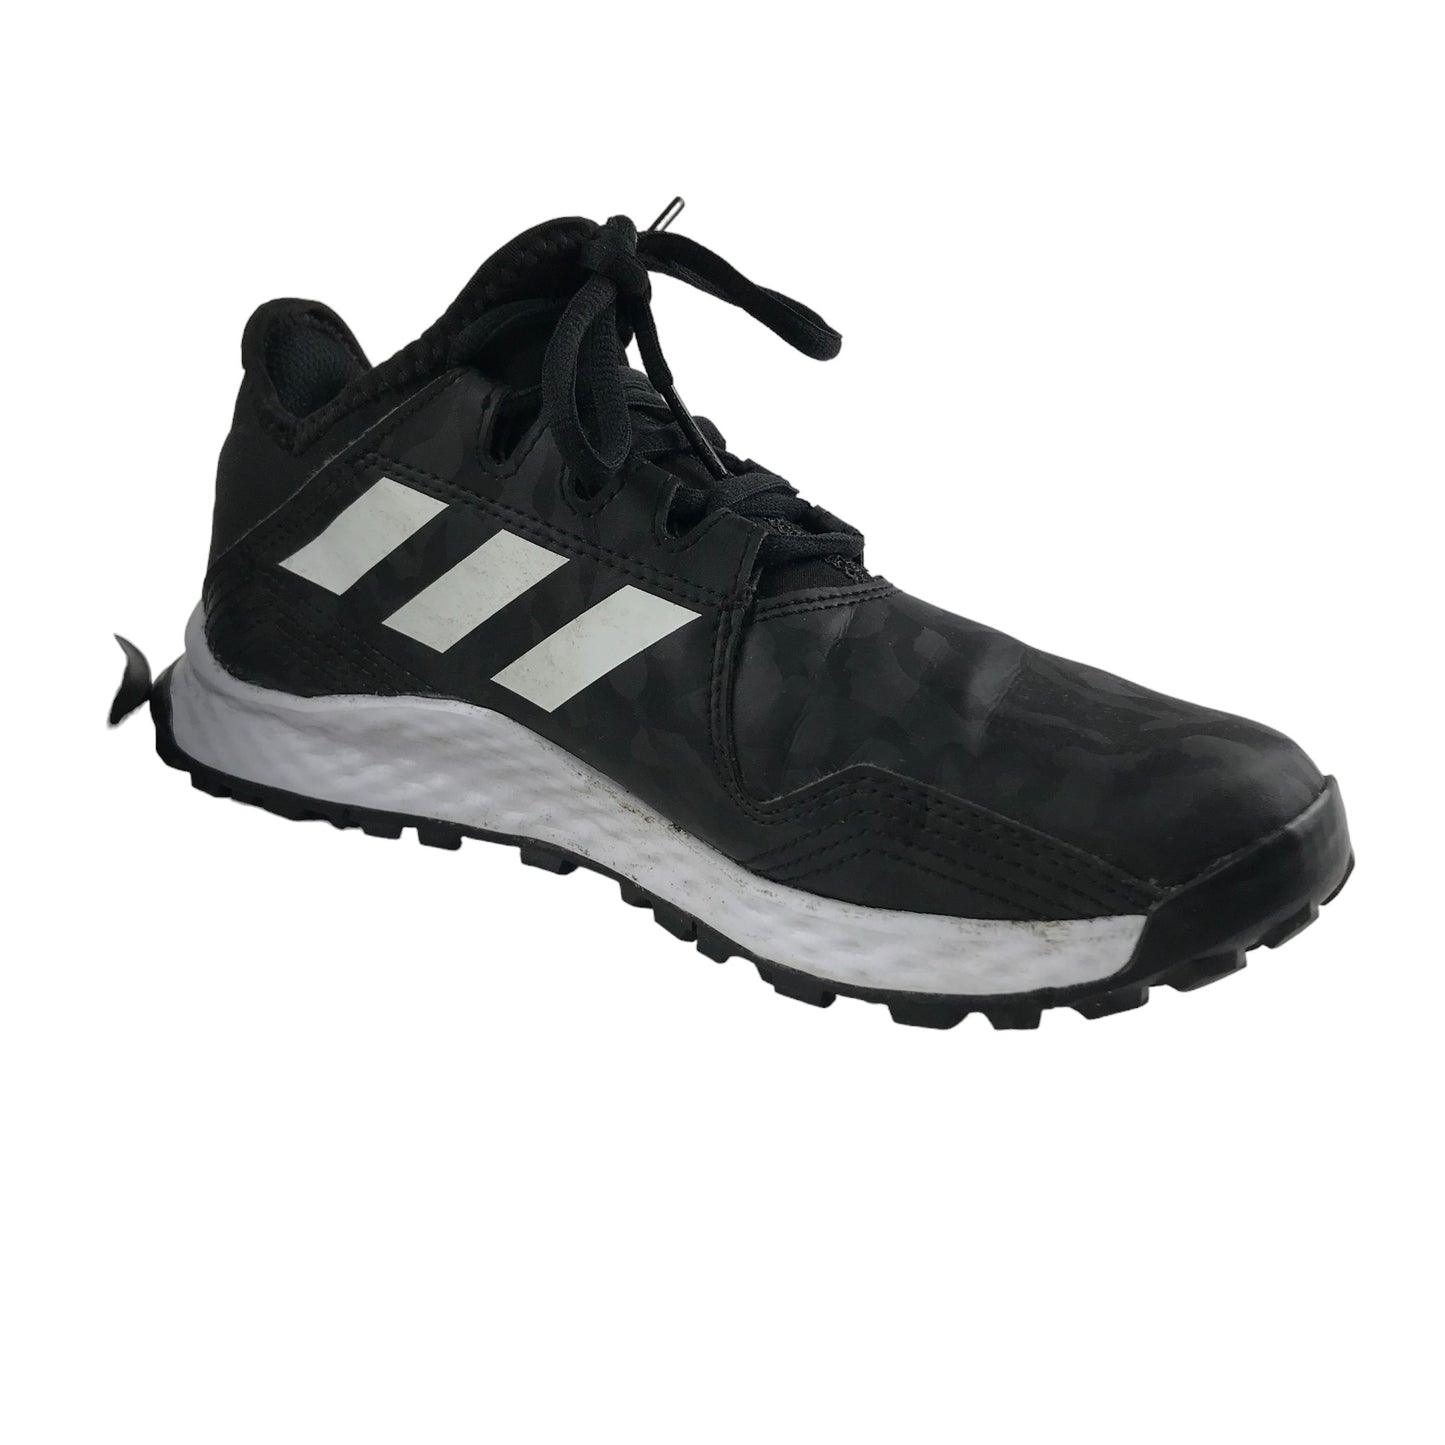 Adidas Trainers Shoe Size 5 Black Camo Pattern with Laces